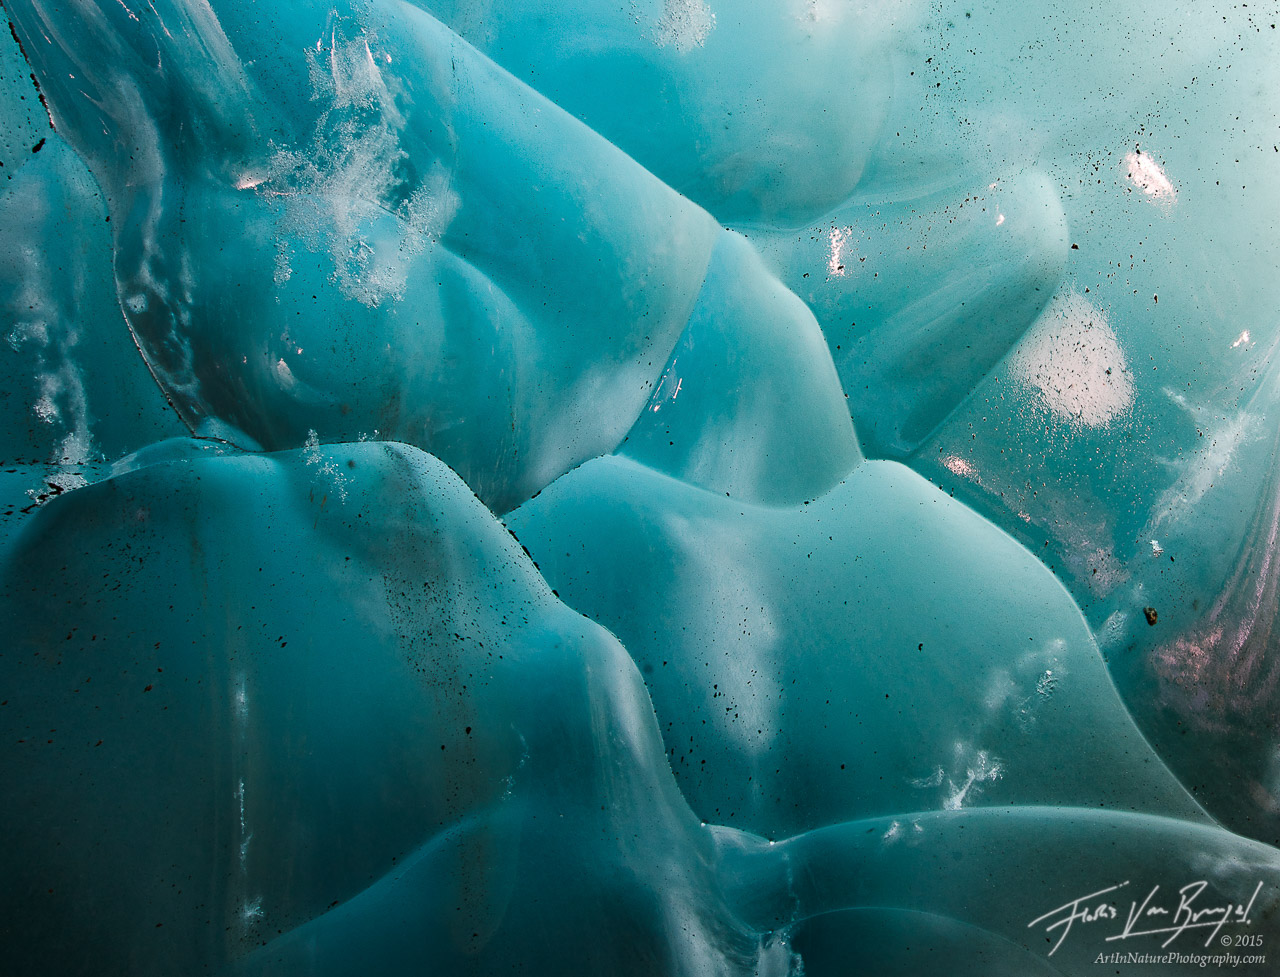 Surreal colors and forms decorate the interior of a cave in the Mendenhall Glacier near Juneau, Alaska.